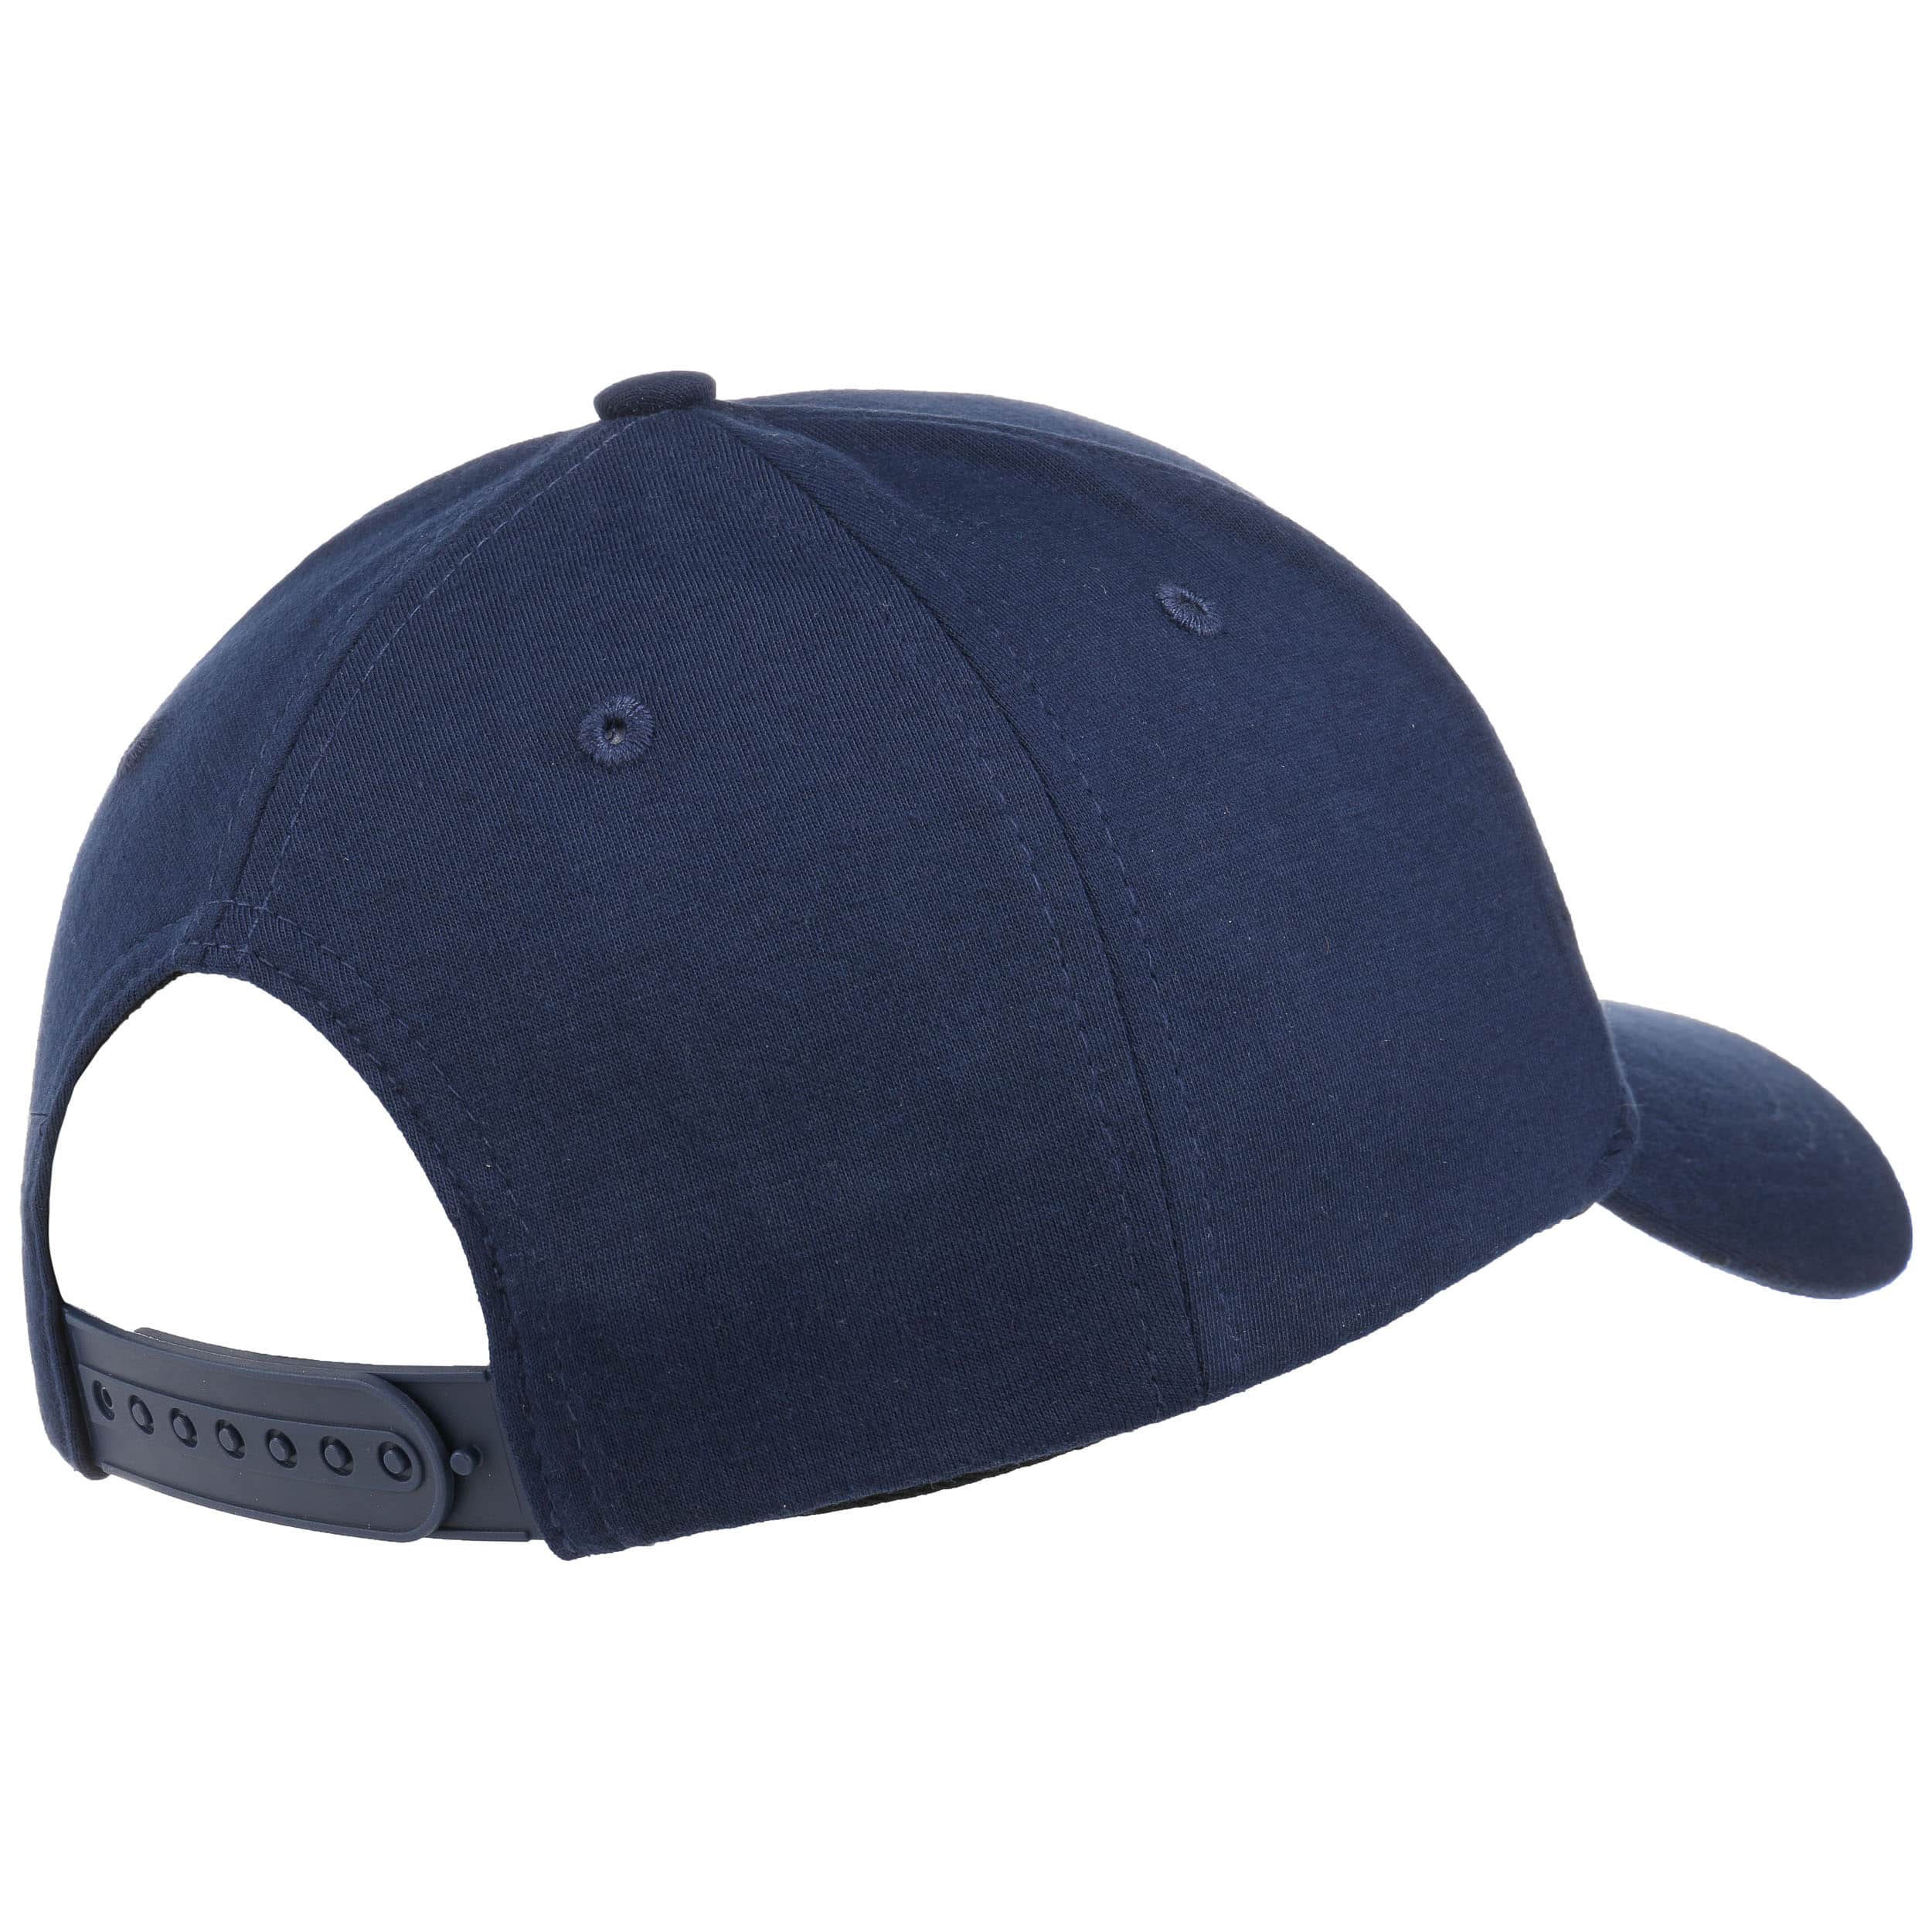 Branded Classic Cap by Bench - 17,95